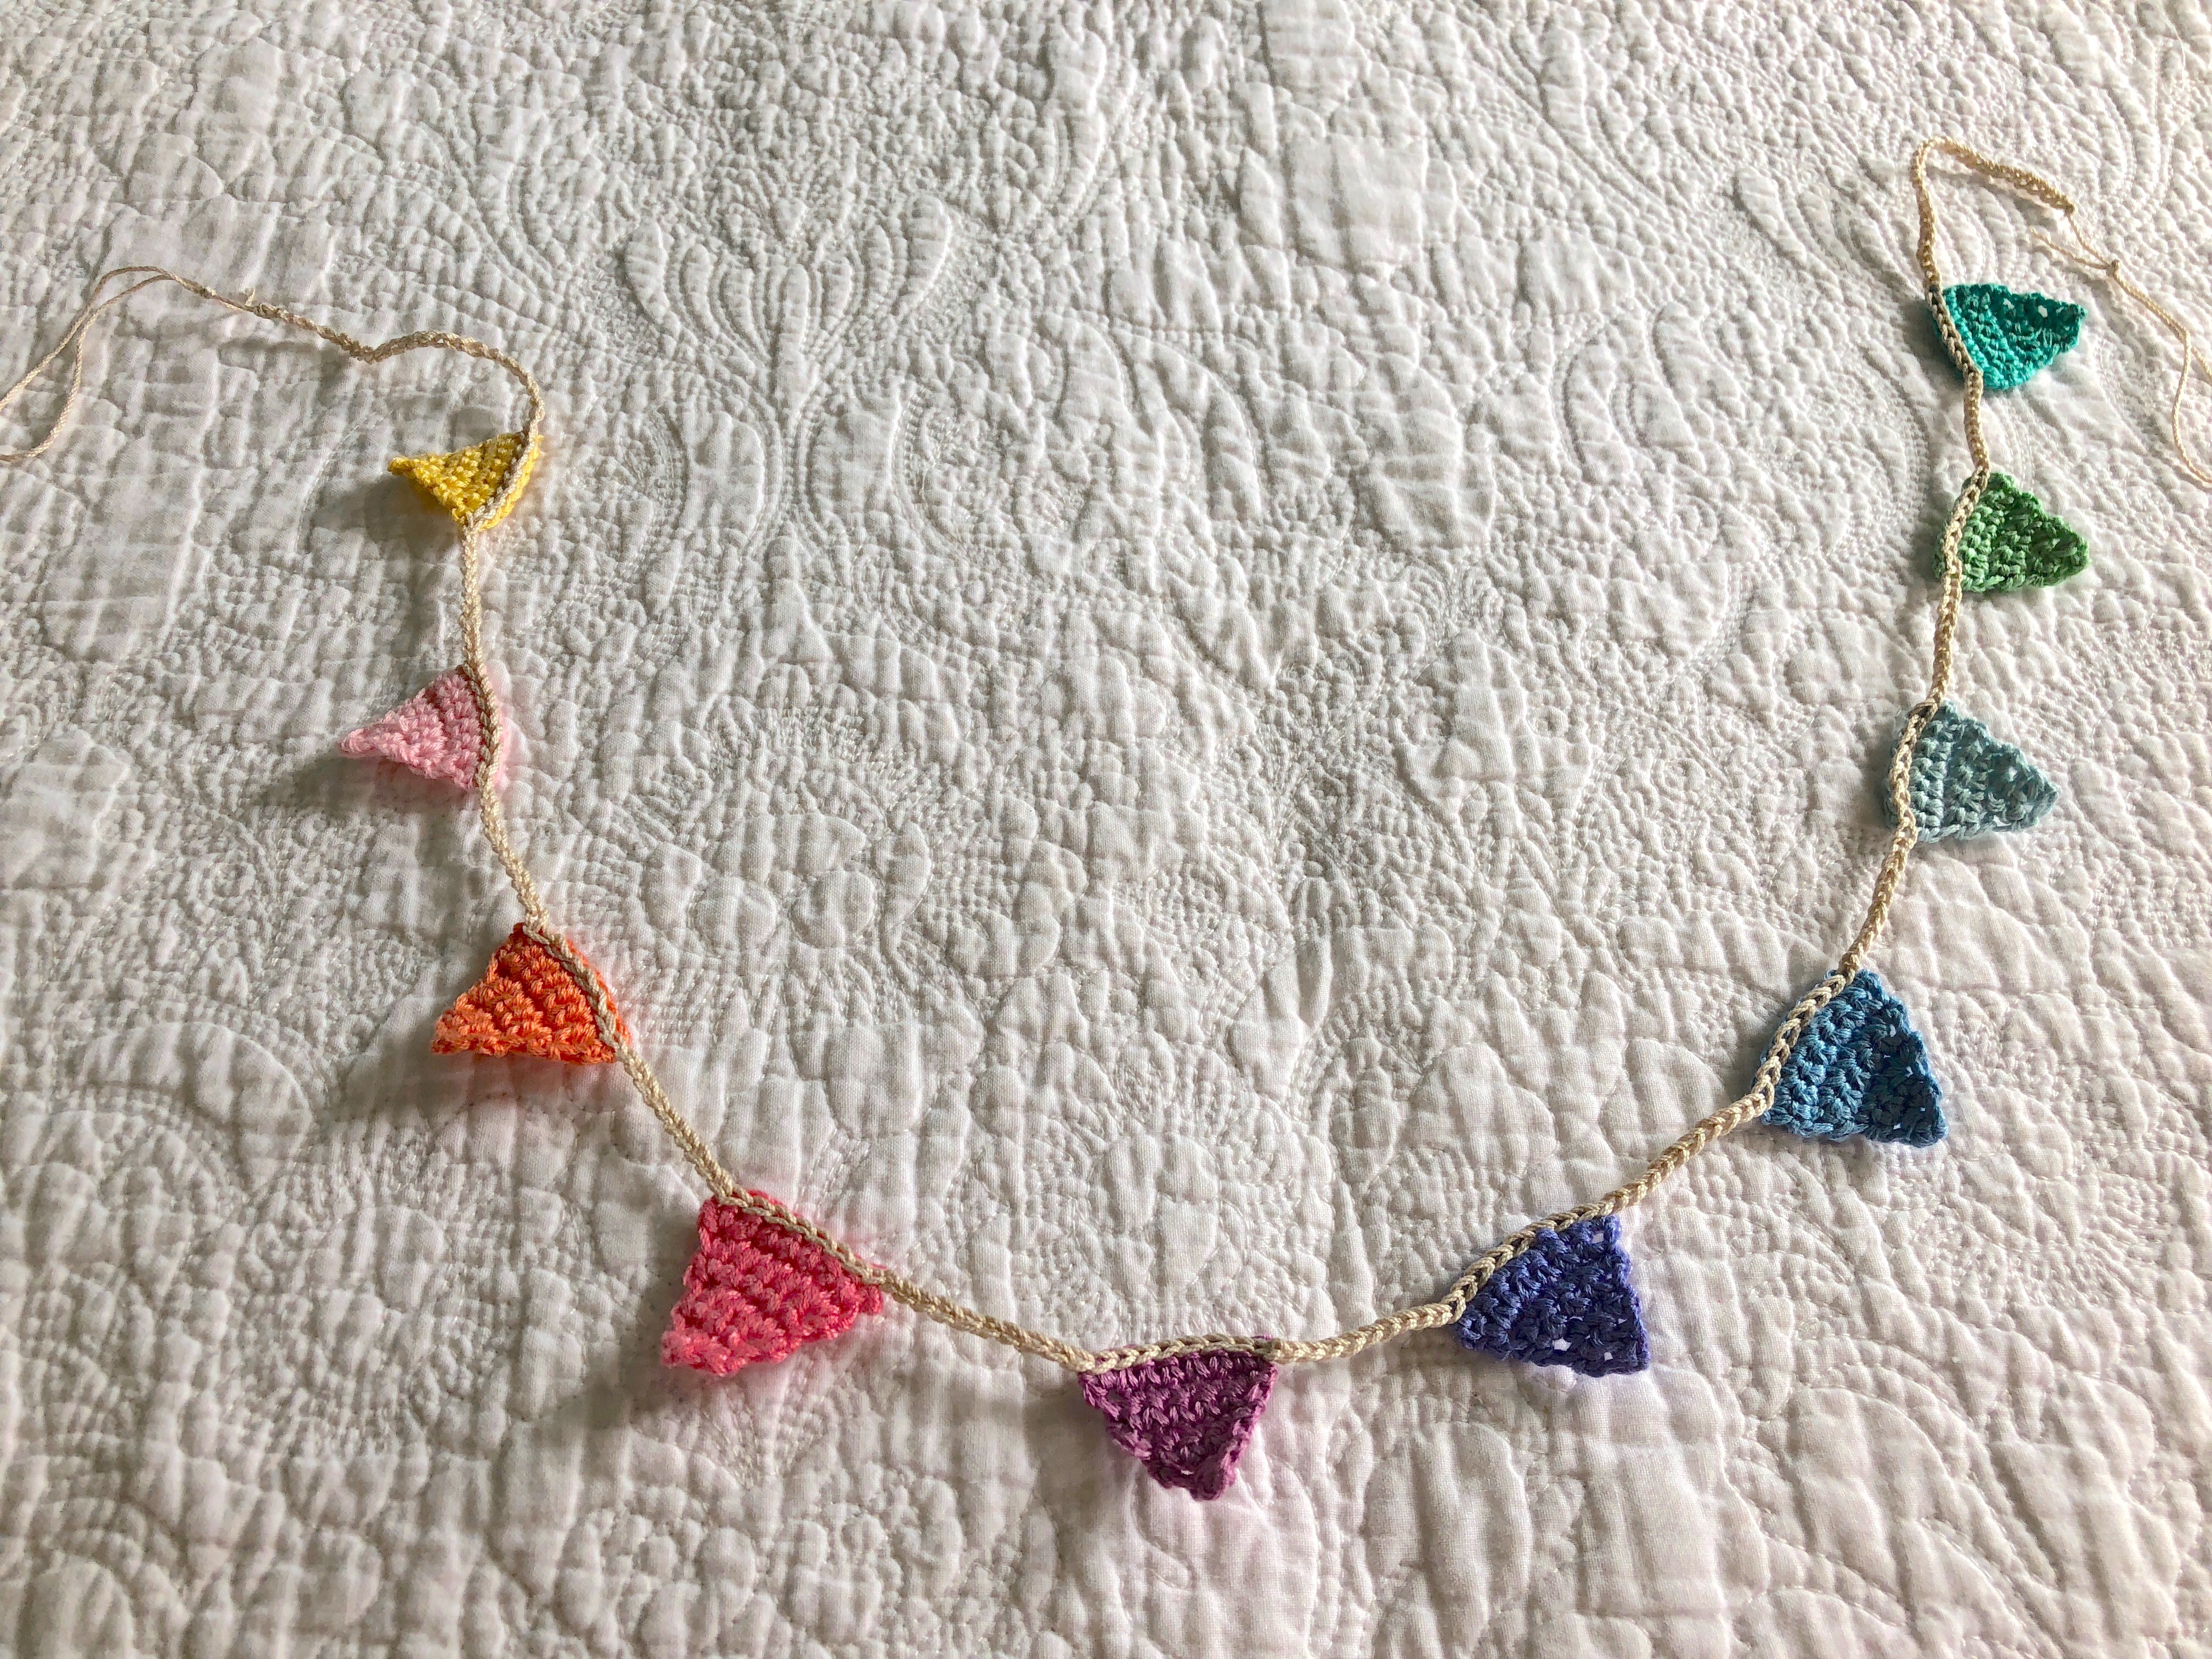 Tiny crocheted bunting in a rainbow of colours.